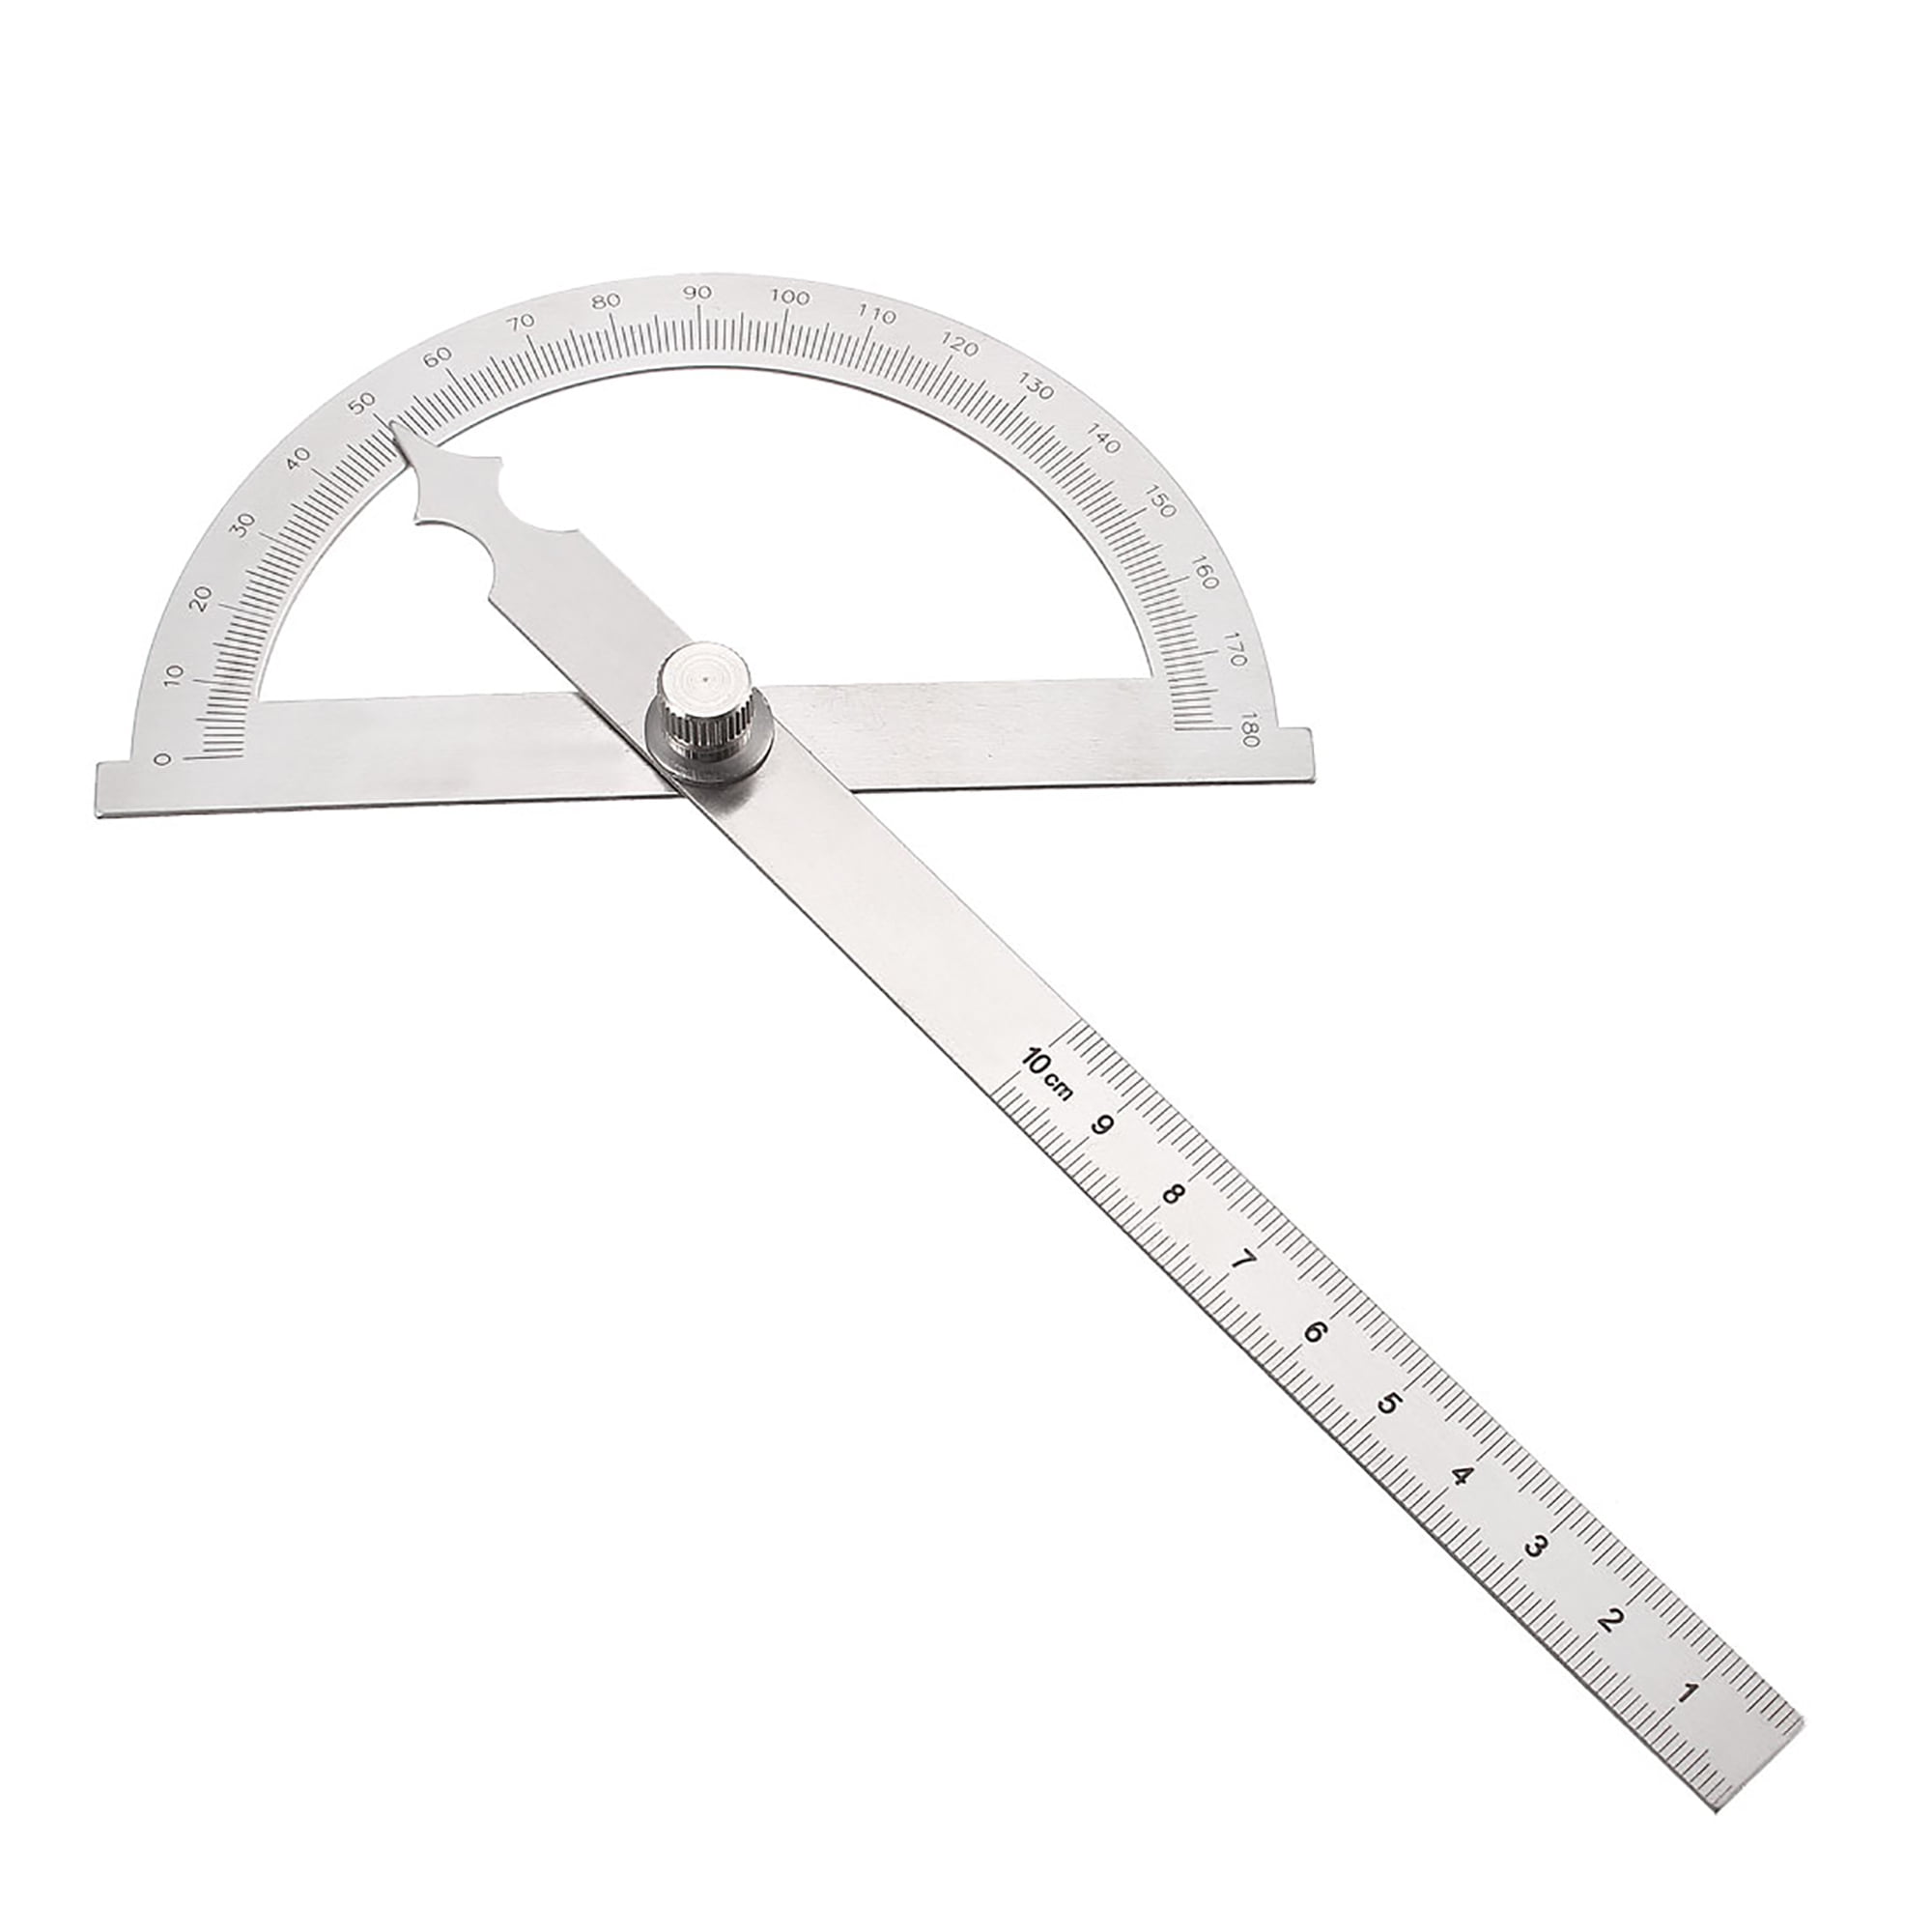 Stainless Steel Protractor 0-180 degree Angle Finder Arm Measuring Ruler Tools 